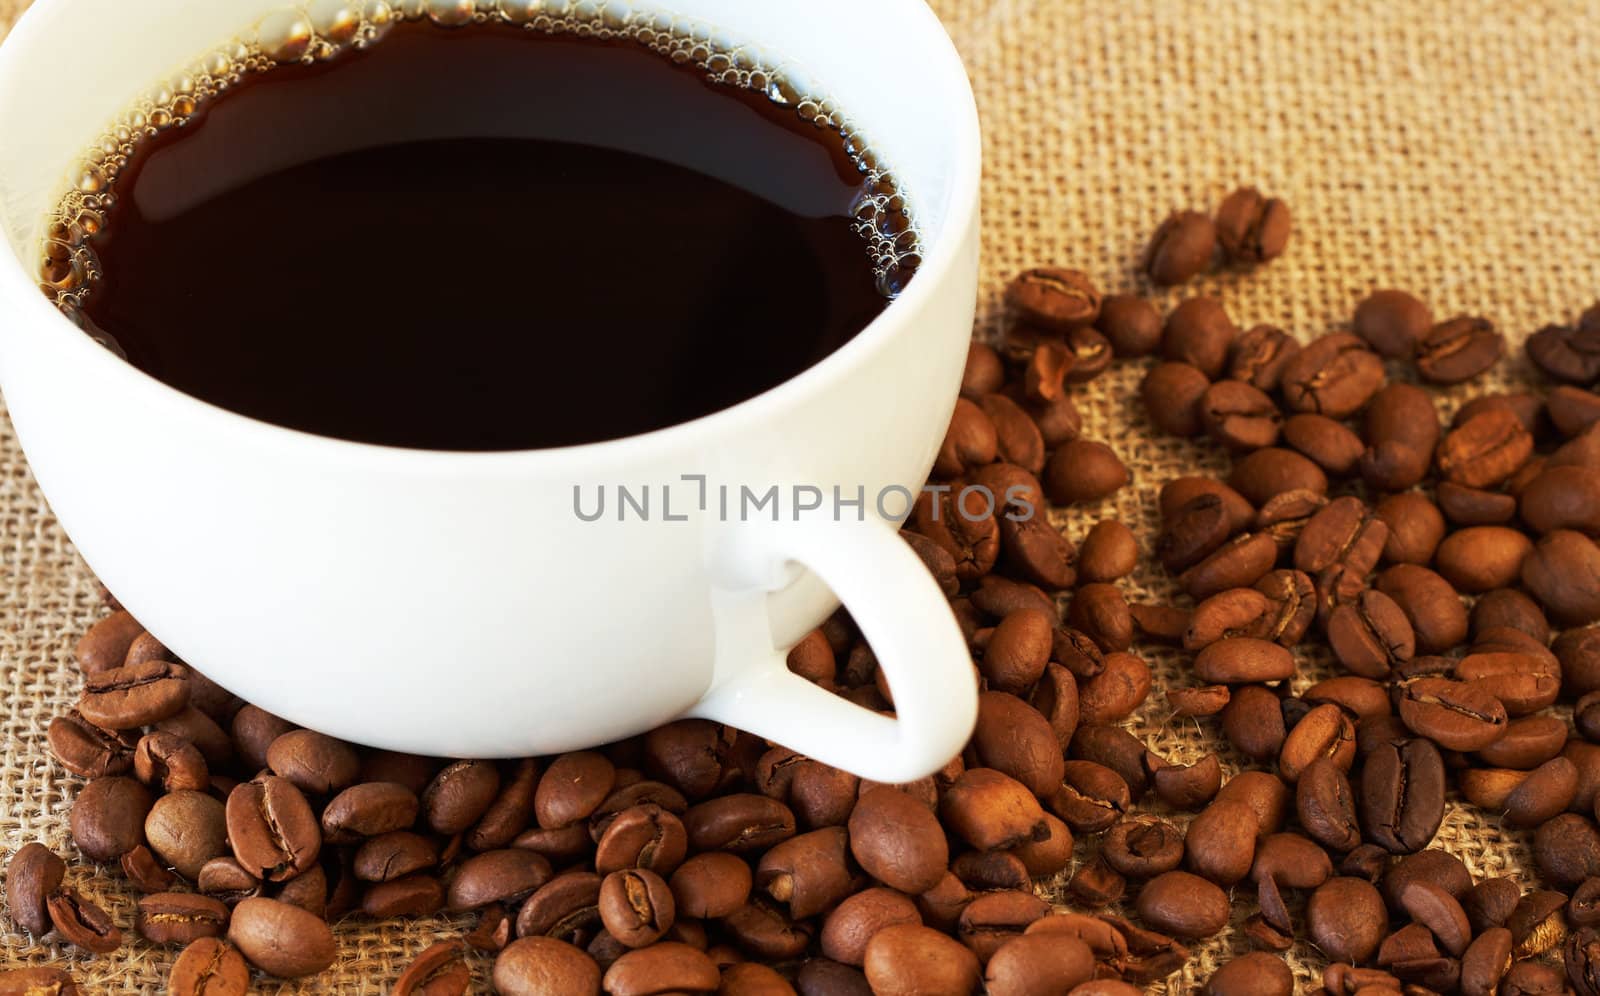 Cup of fresh brewed coffee with roasted coffee beans on straw placemat